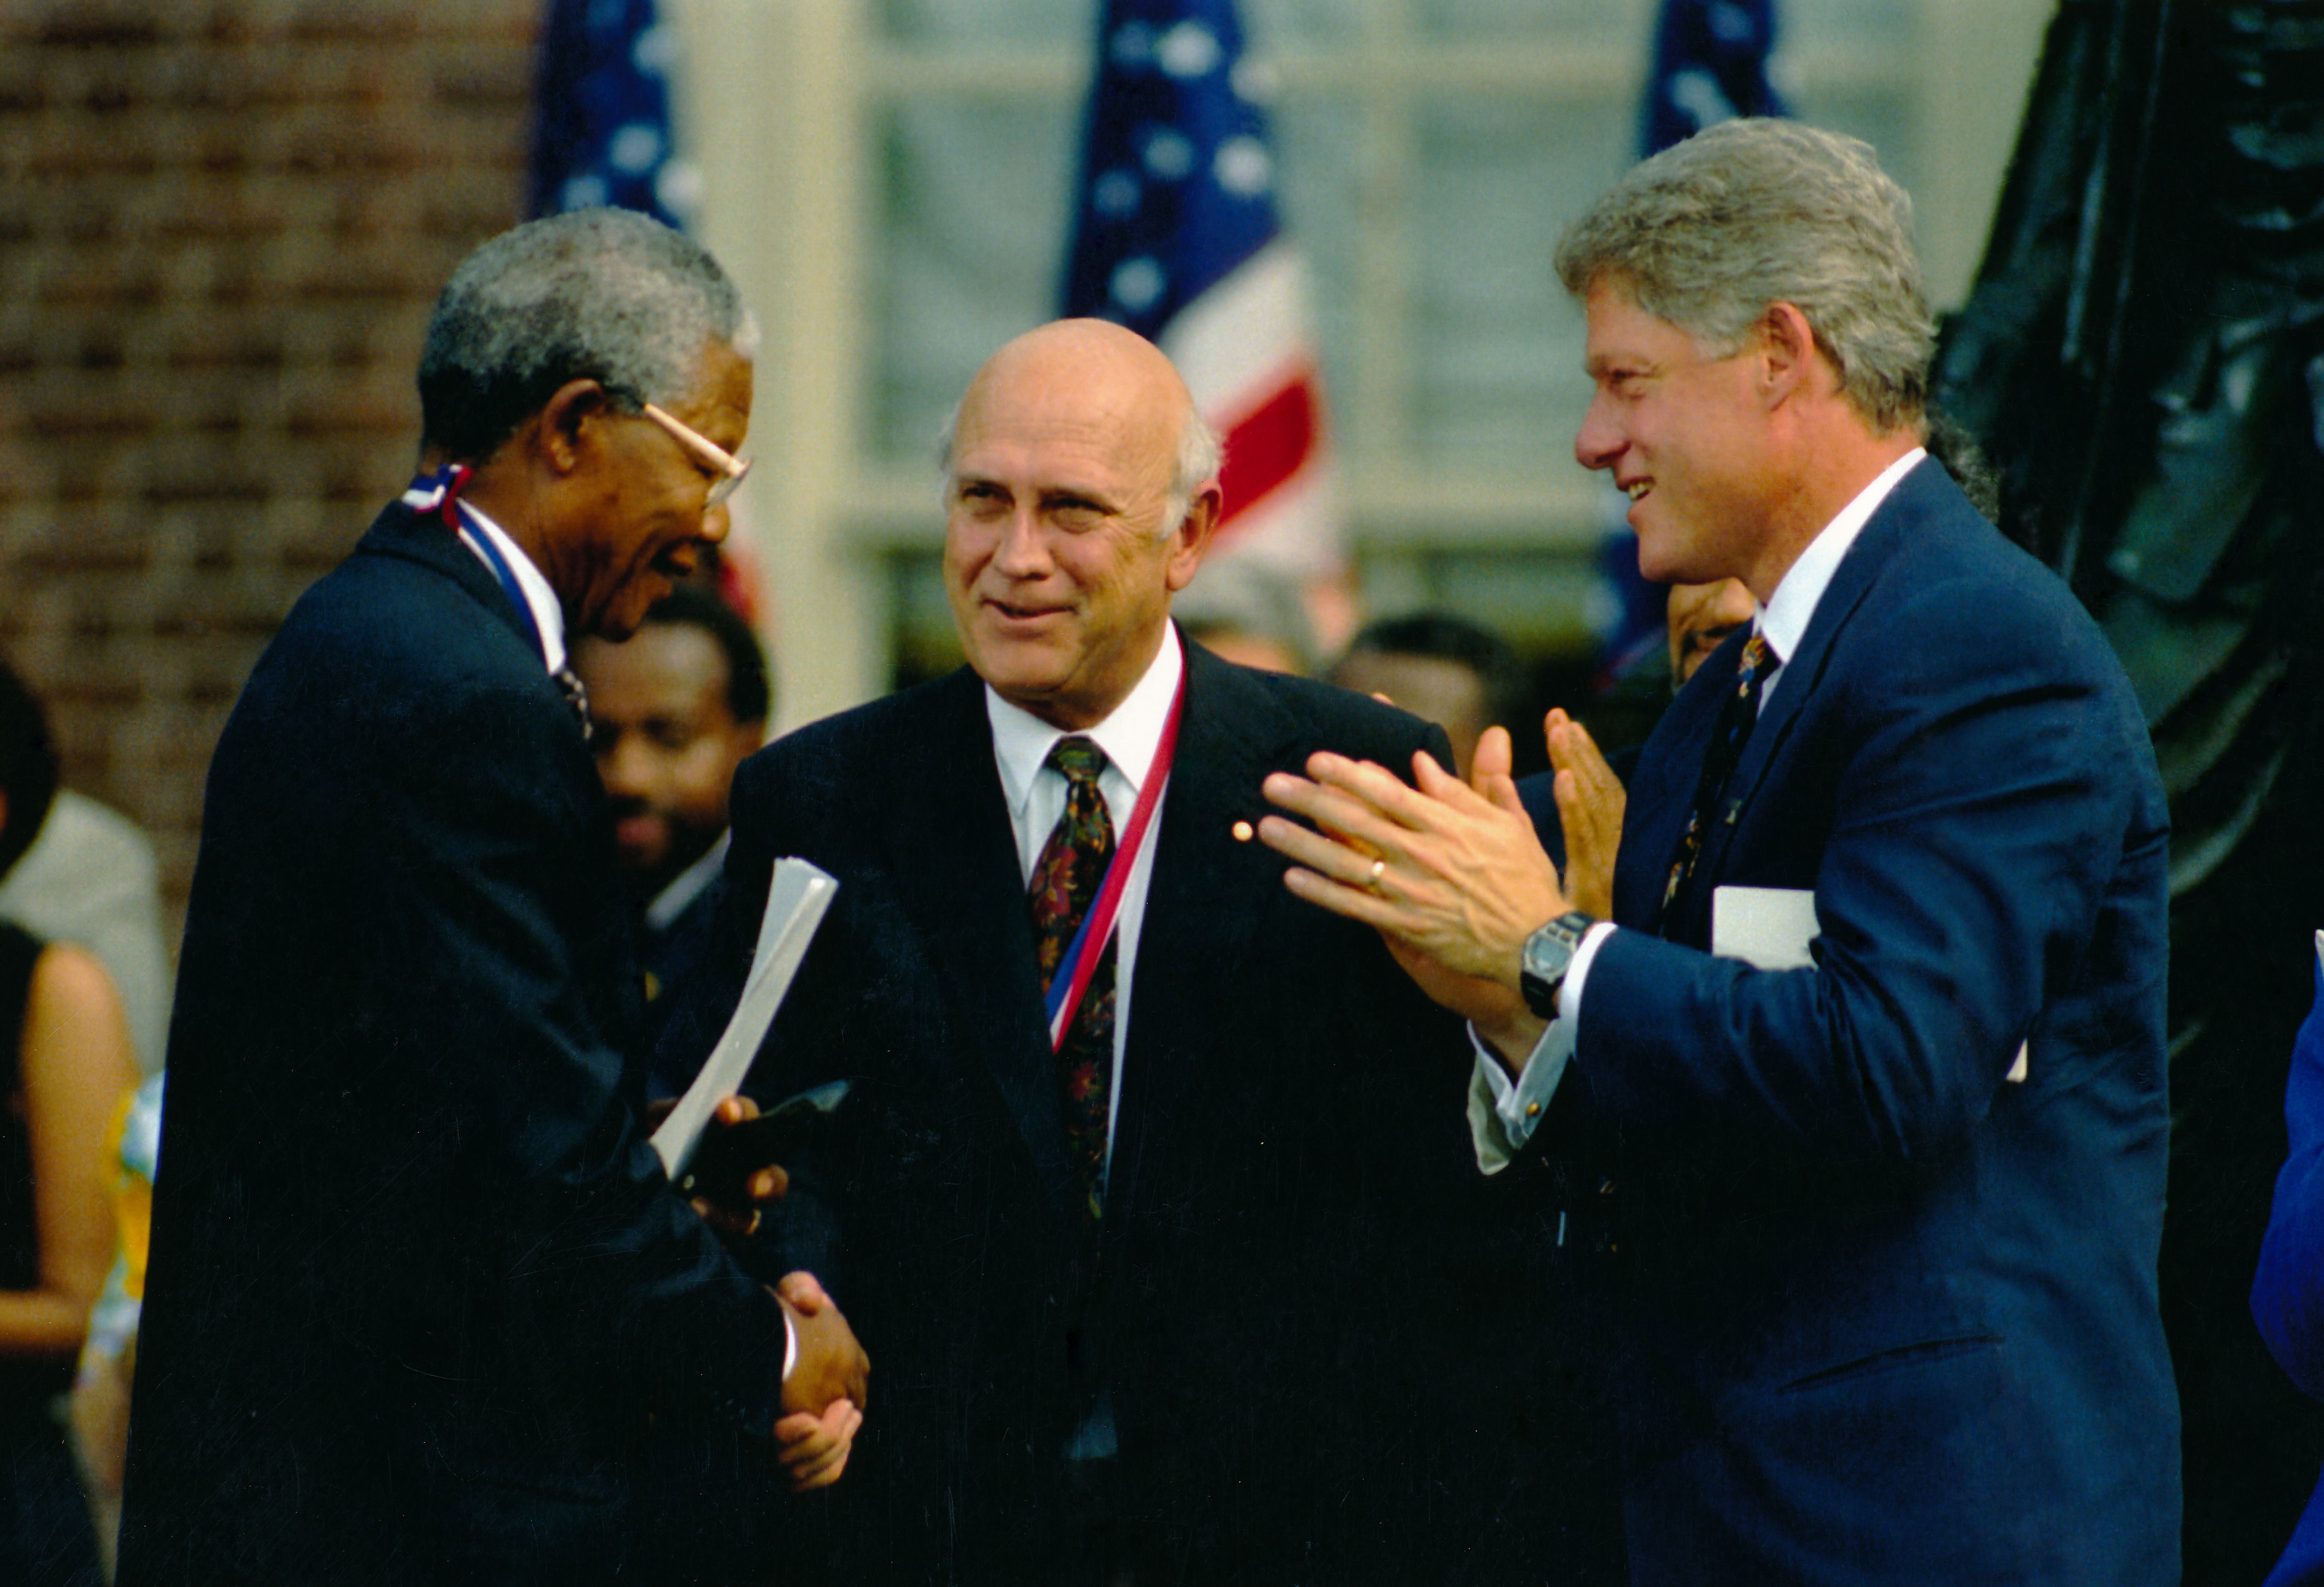 Nelson Mandela (left) and President FW de Klerk (centre) are congratulated by President Bill Clinton after jointly receiving the Liberty Medal at Independence Hall, Philadelphia, July, 4 1993. 